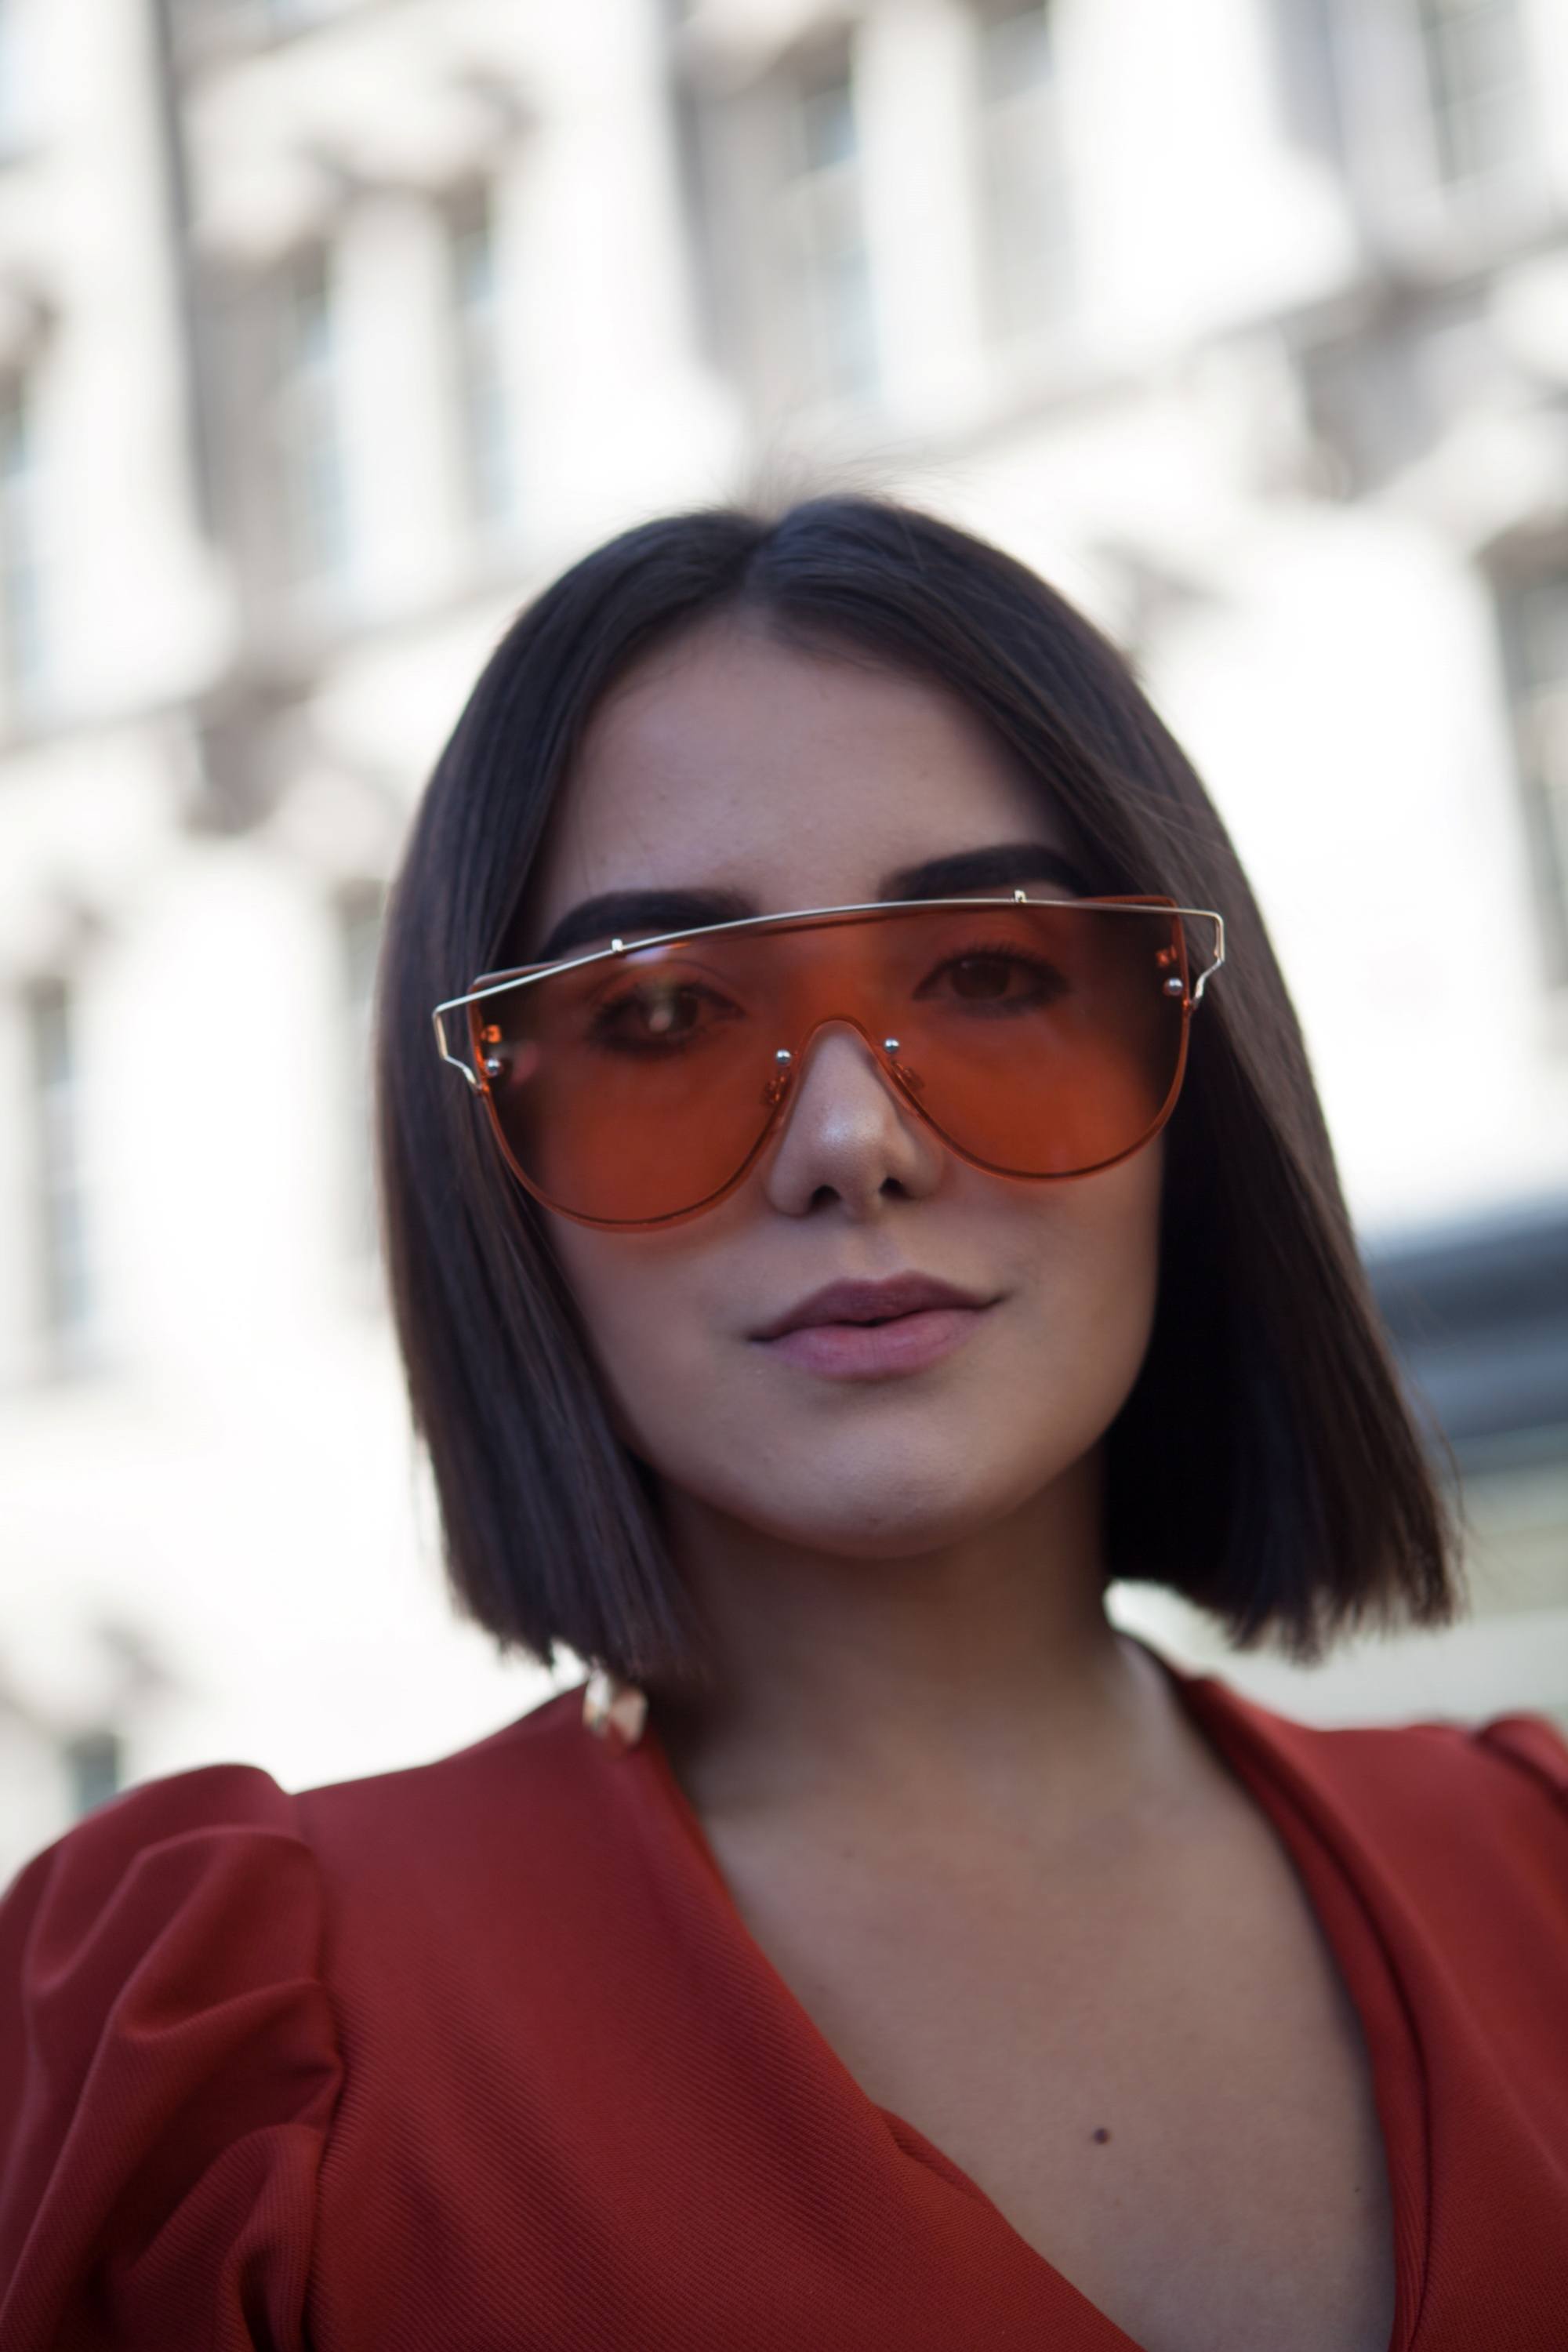 Woman with an A-line bob wearing sunglasses